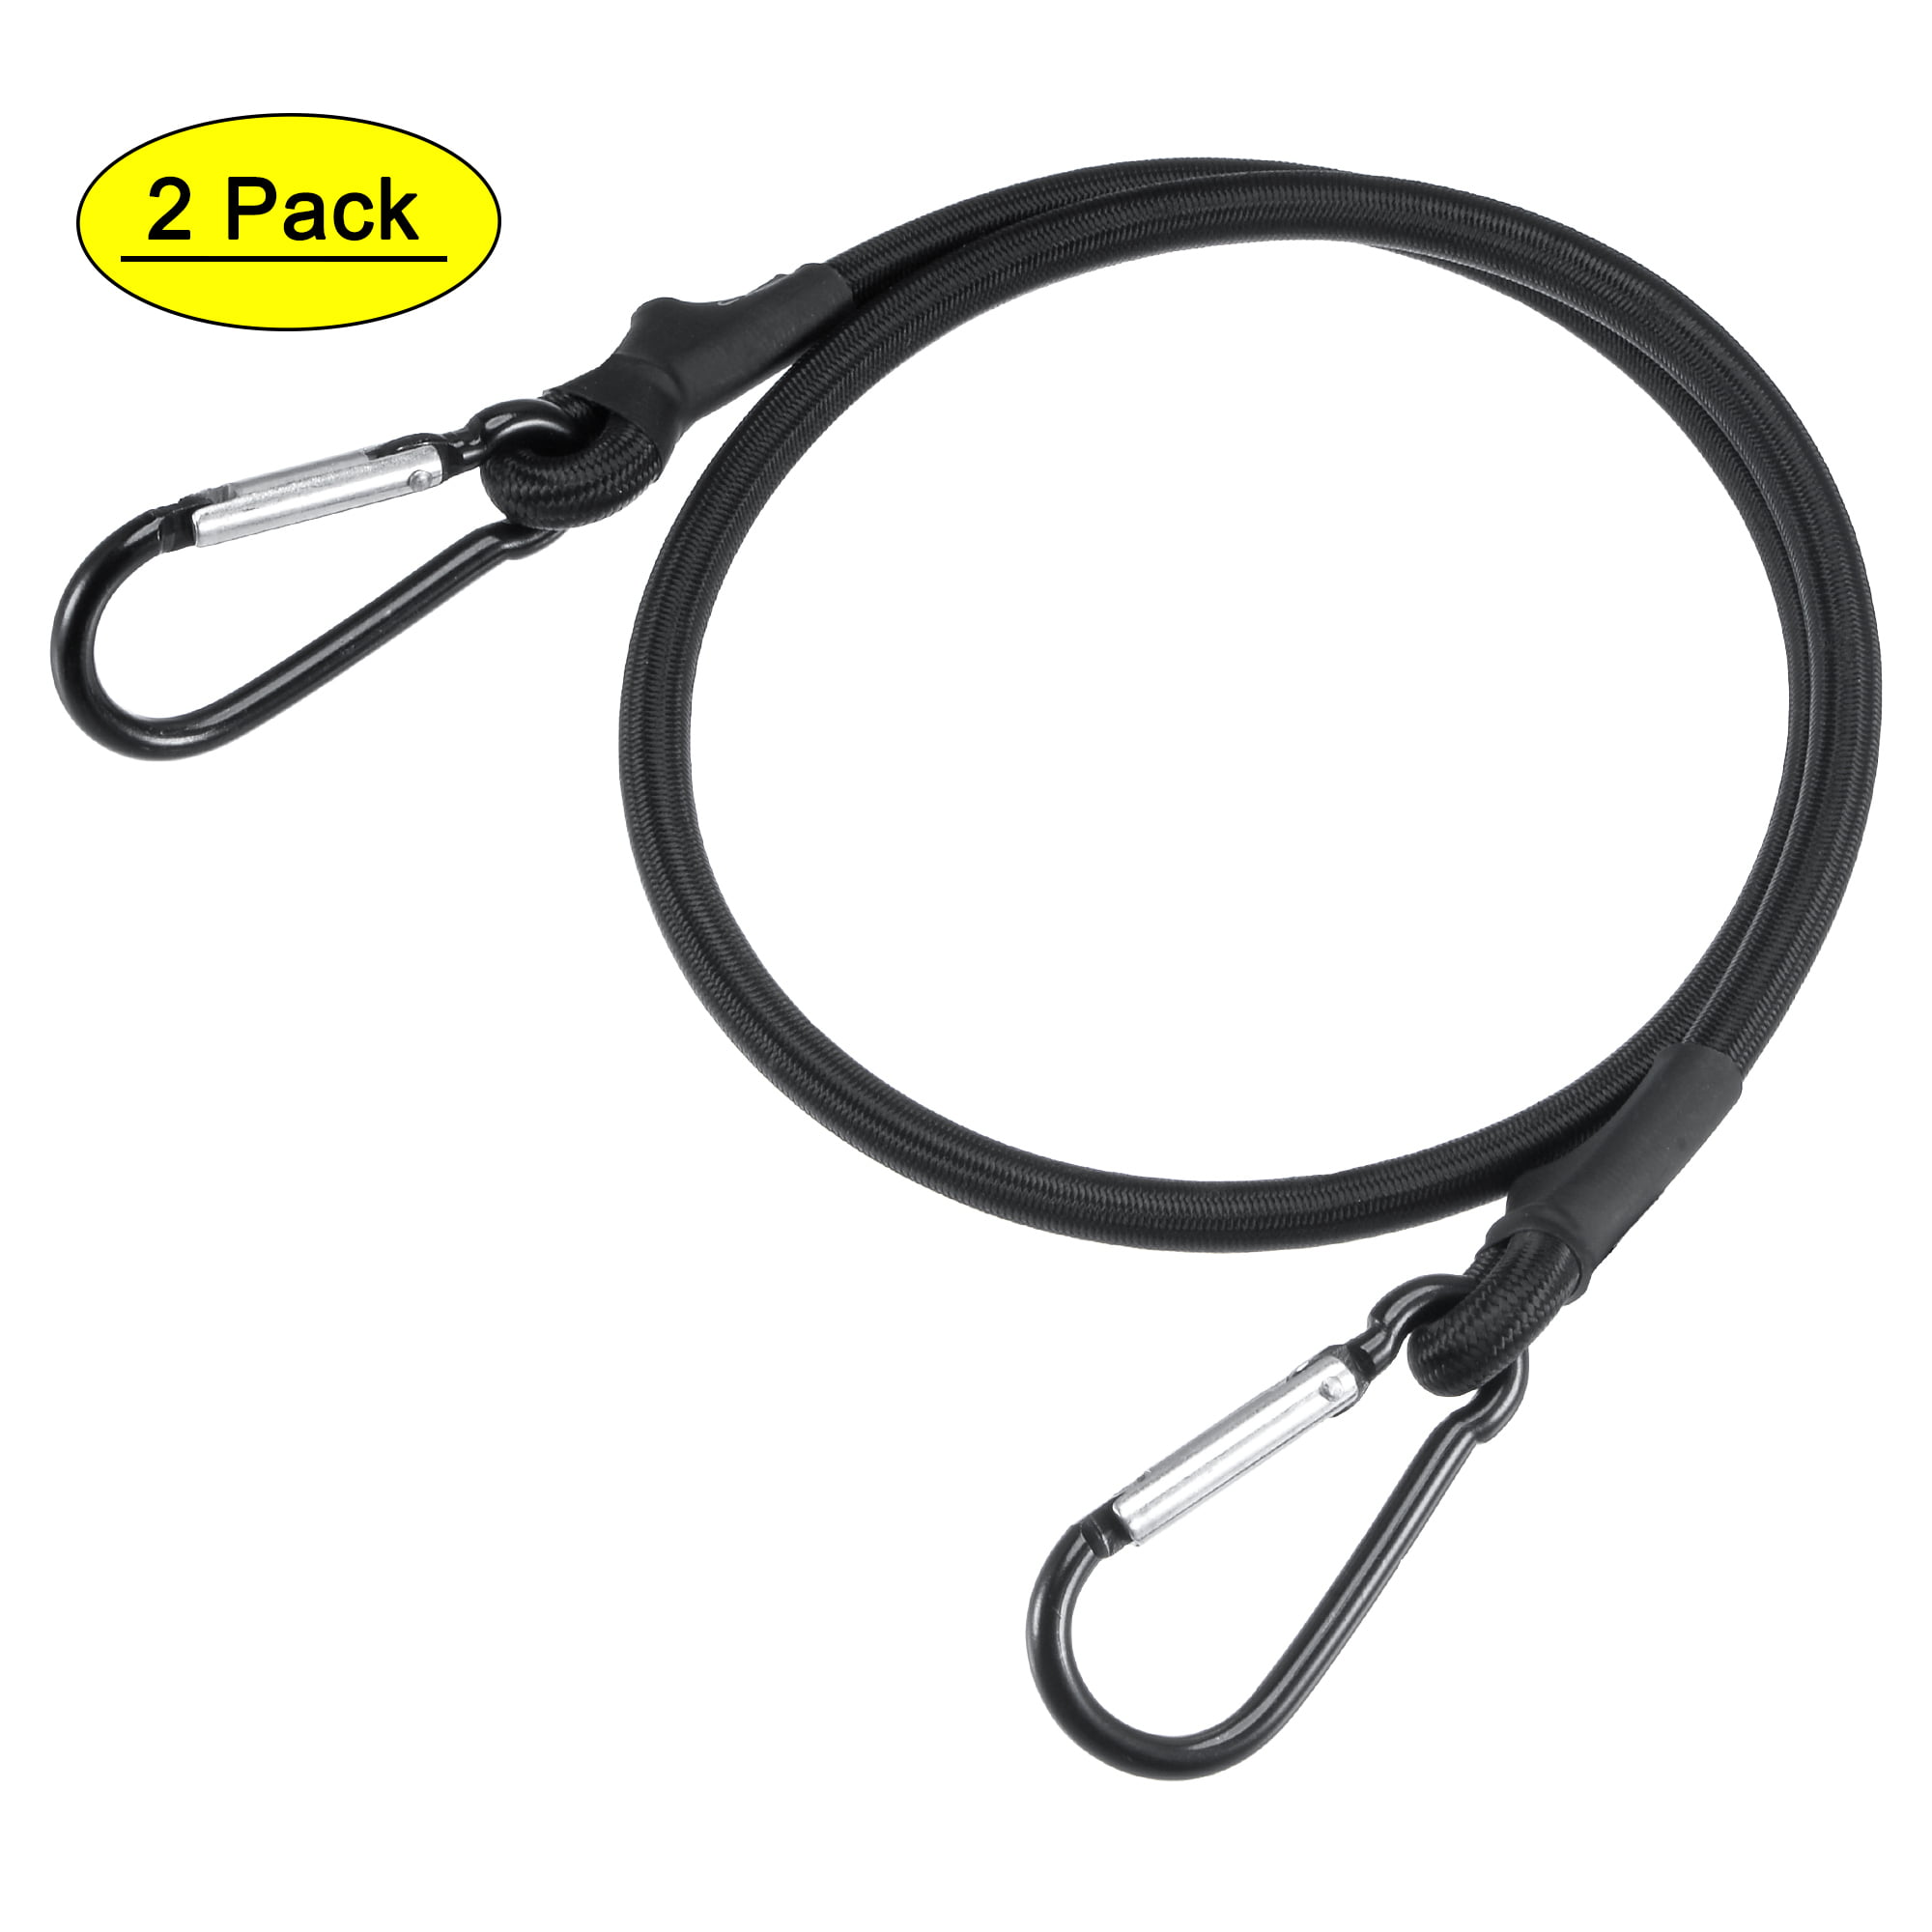 NEW 2x 80CM HEAVY DUTY BUNGEE ANTI ROLL CORDS LUGGAGE STRAPS ELASTIC FLAT ROPE 